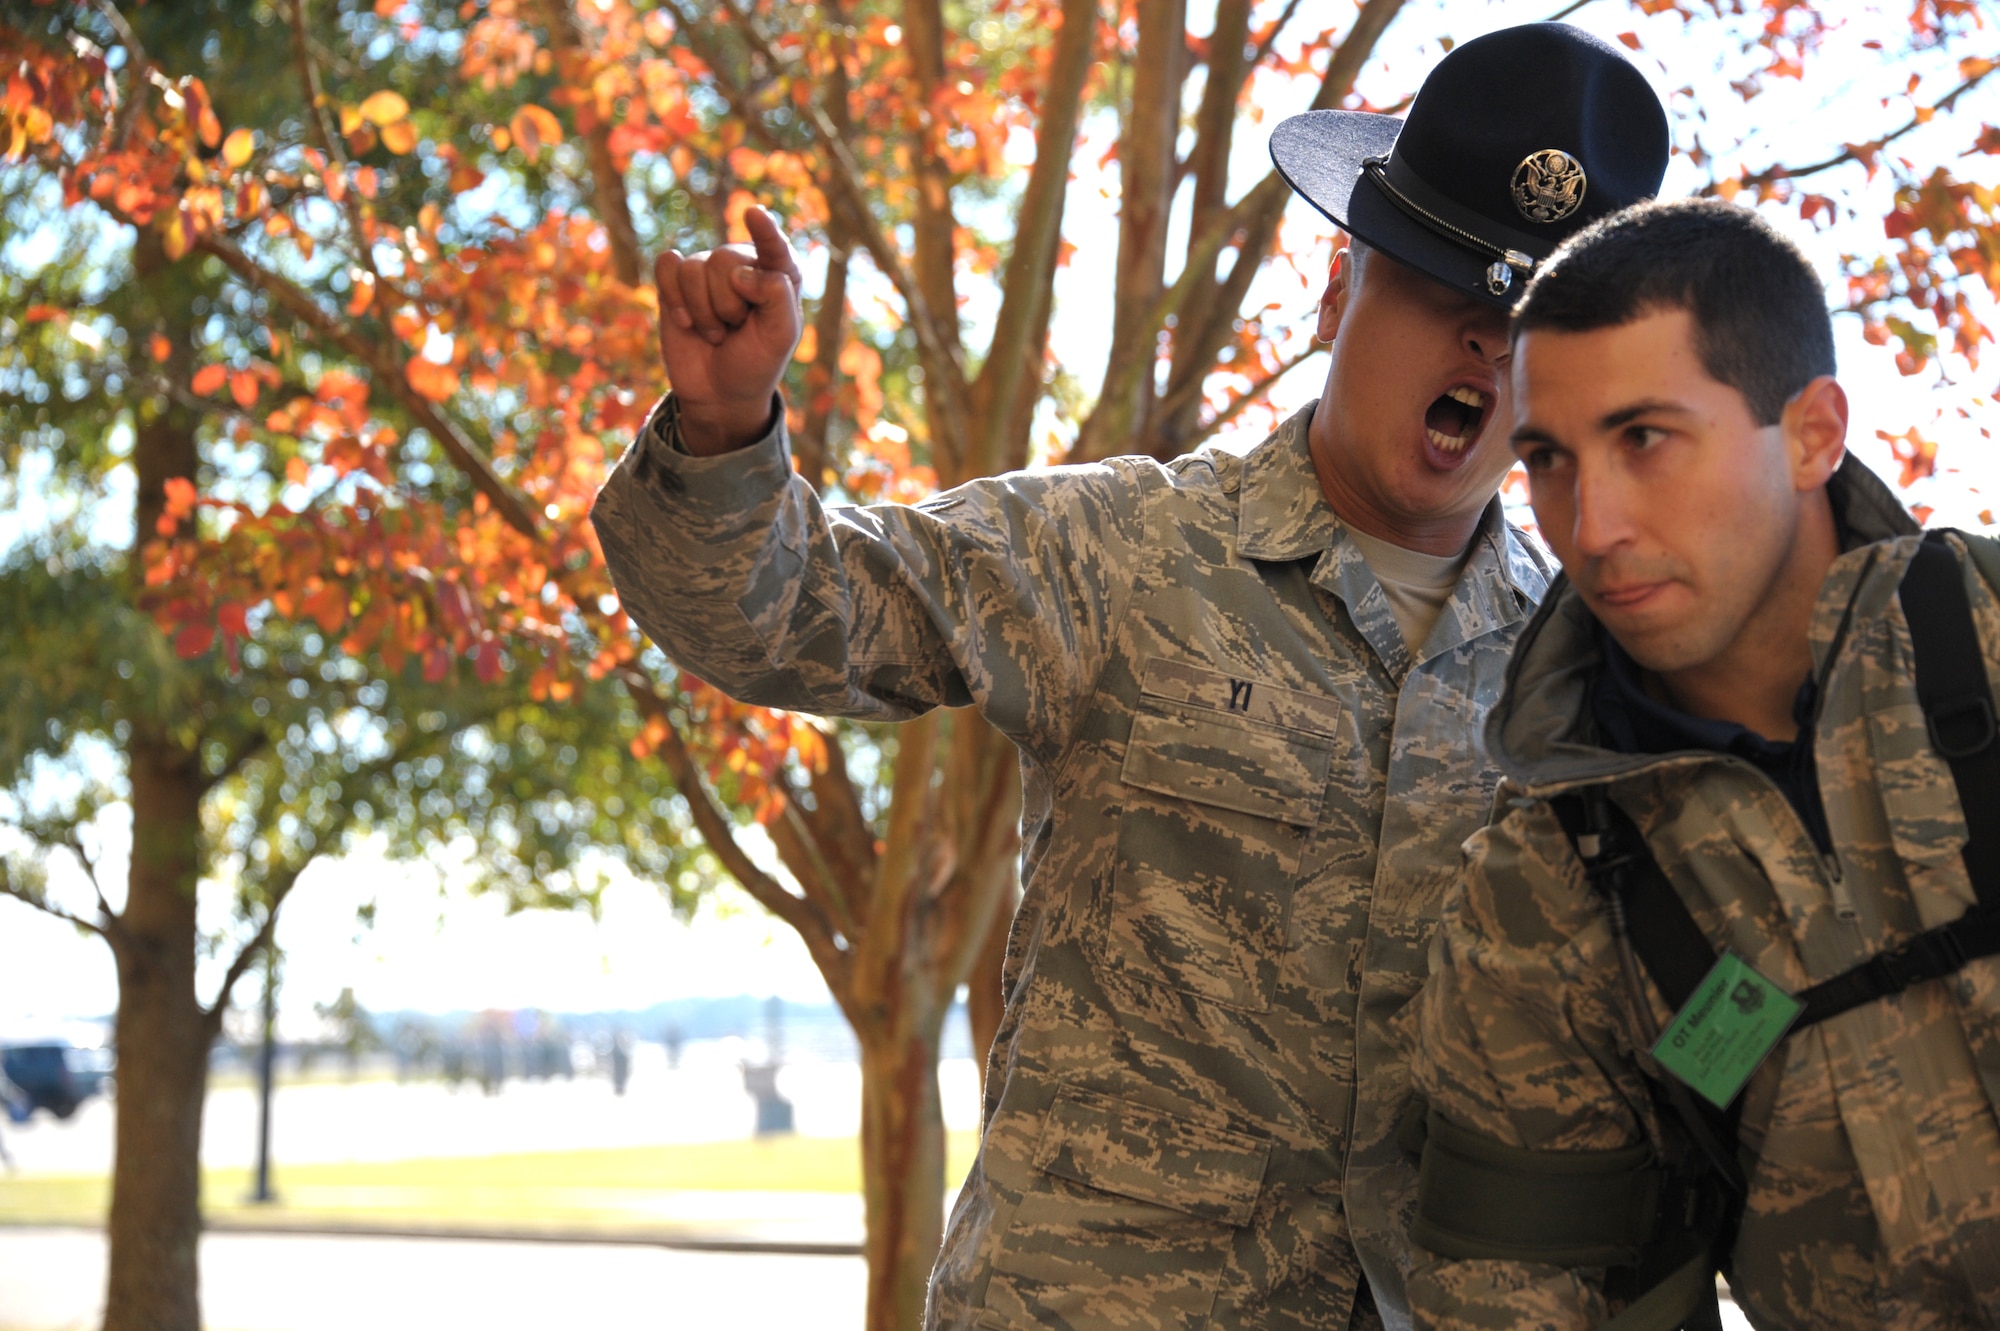 Tech. Sgt. Chi Yi welcomes a cadet to Officer Training School at Maxwell Air Force Base, Nov. 13, 2013. Yi serves as a Military Training Instructor for OTS. (U.S. Air Force Photo by Senior Airman William Blankenship)